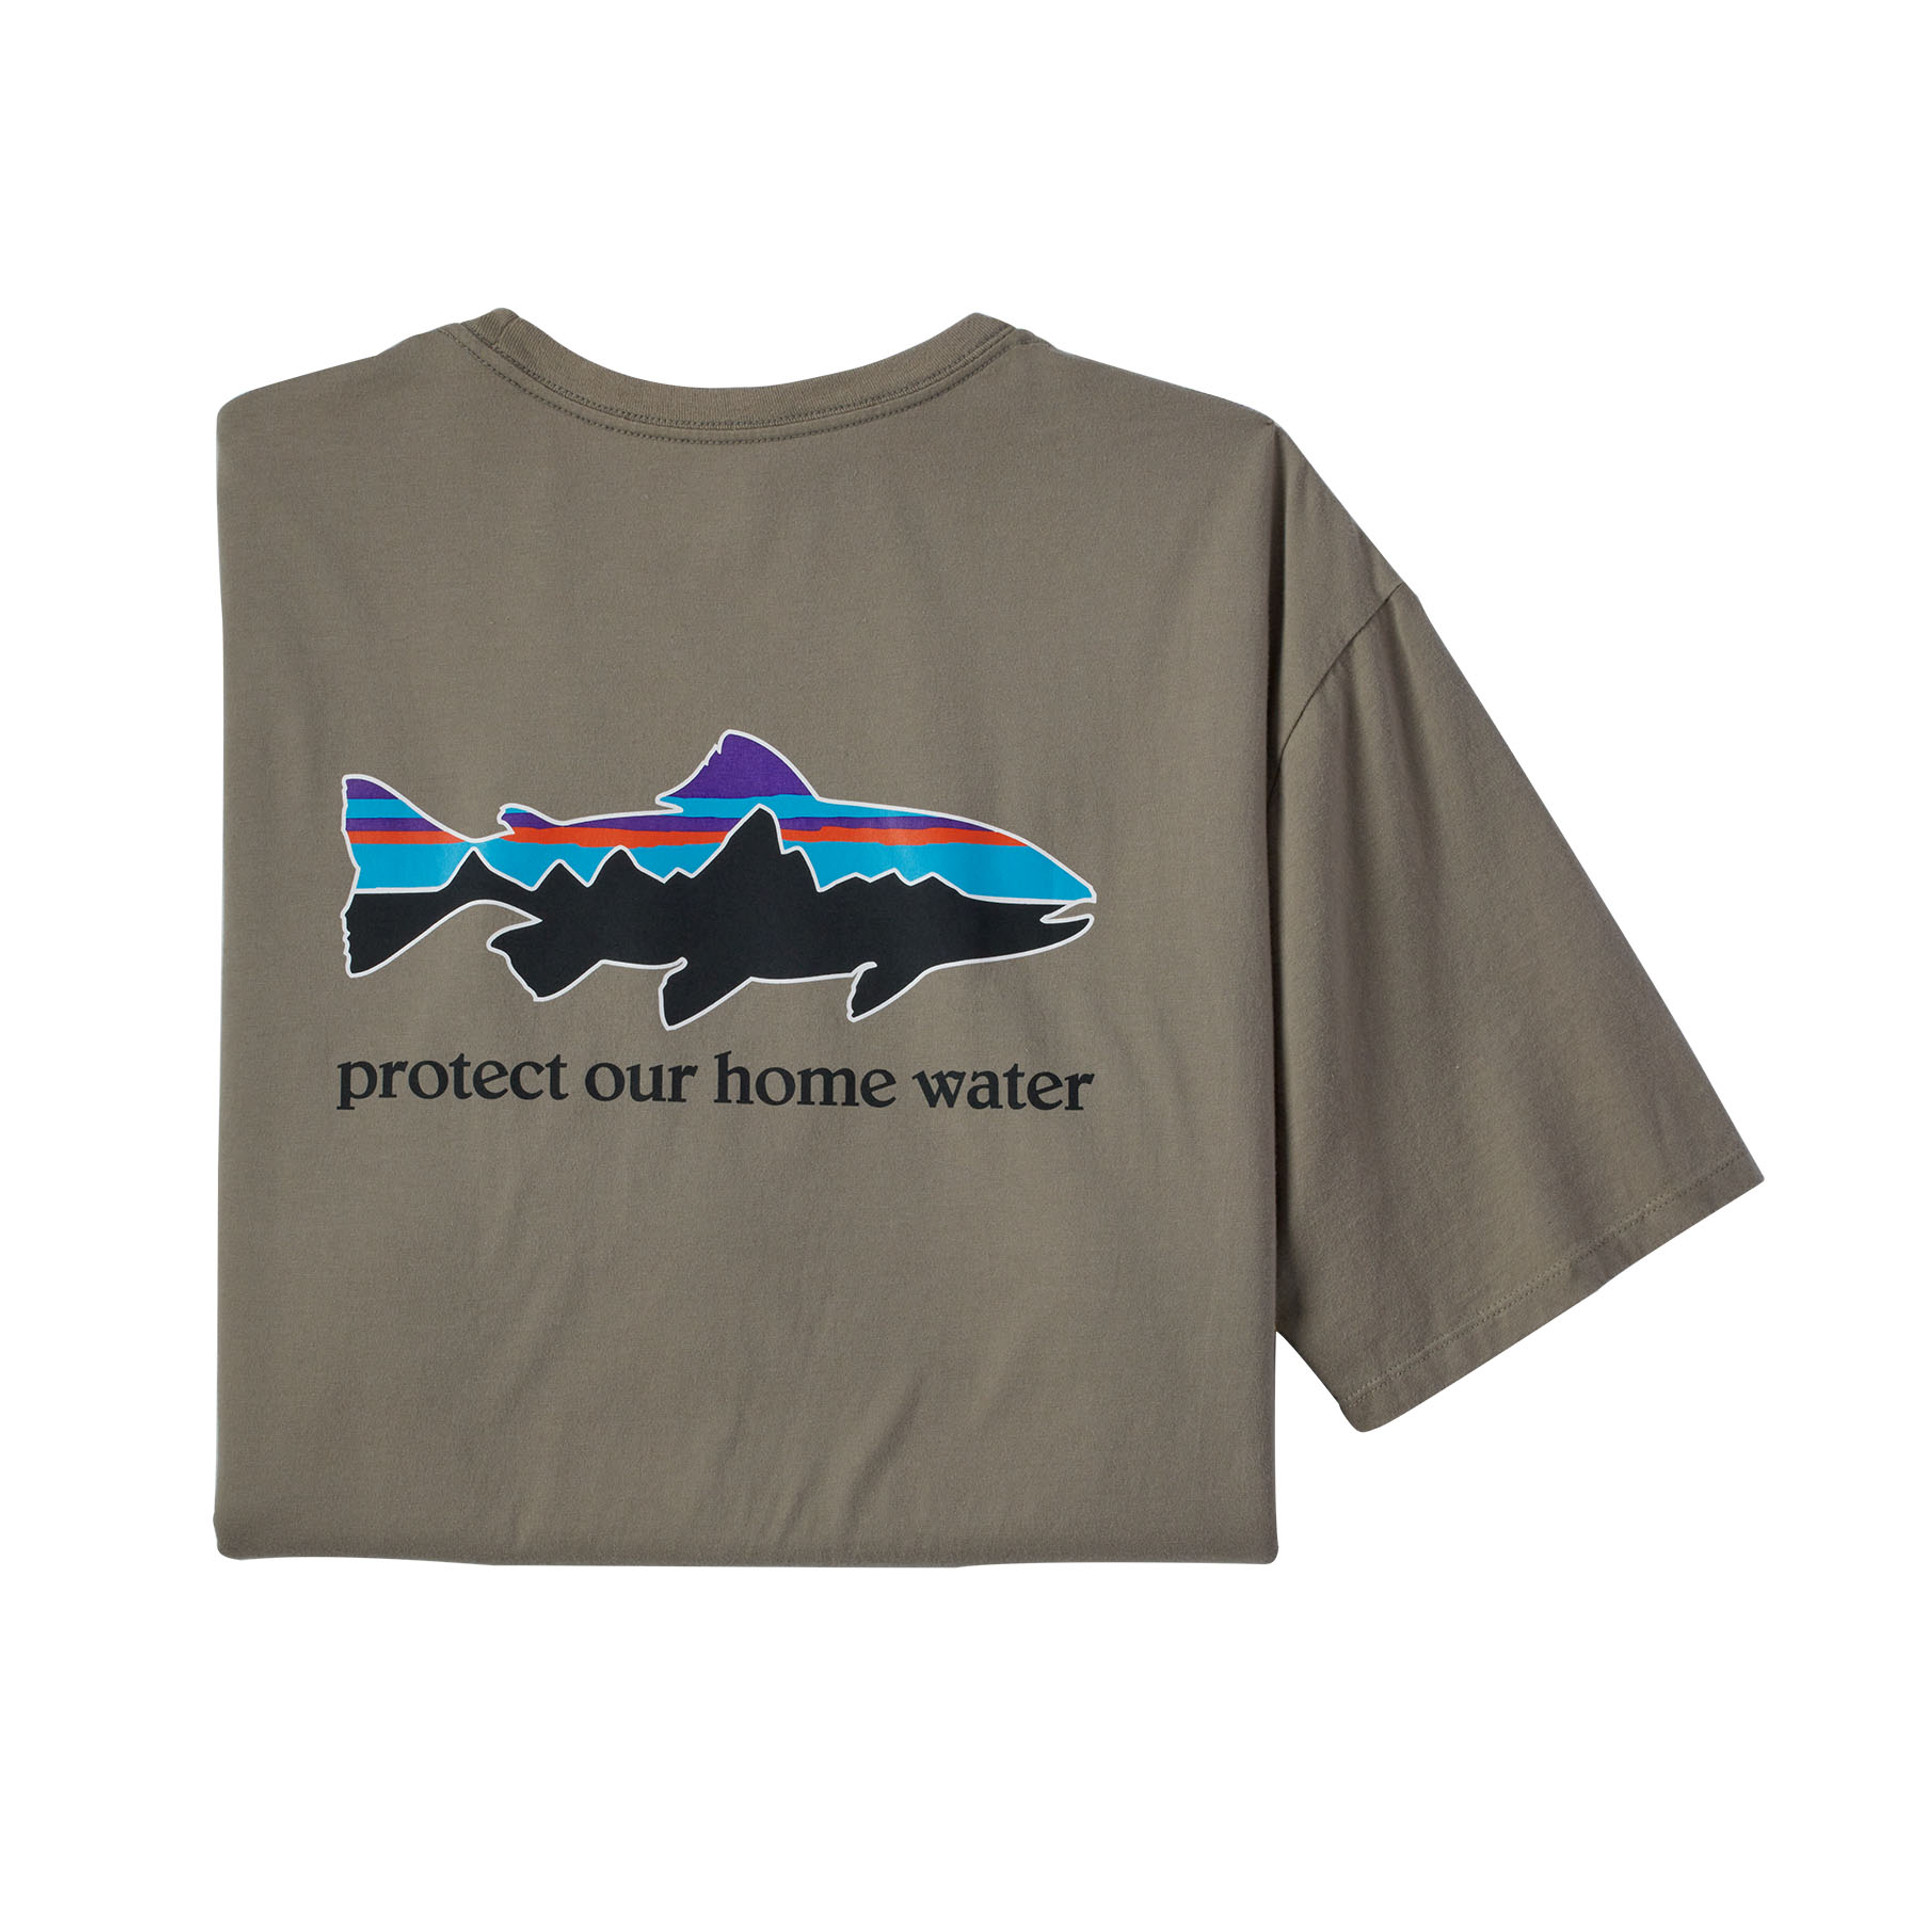 Patagonia Men's Home Water Trout T-Shirt (Sizes XS - XXL) $19.75 at REI & More w/ Free Store Pickup